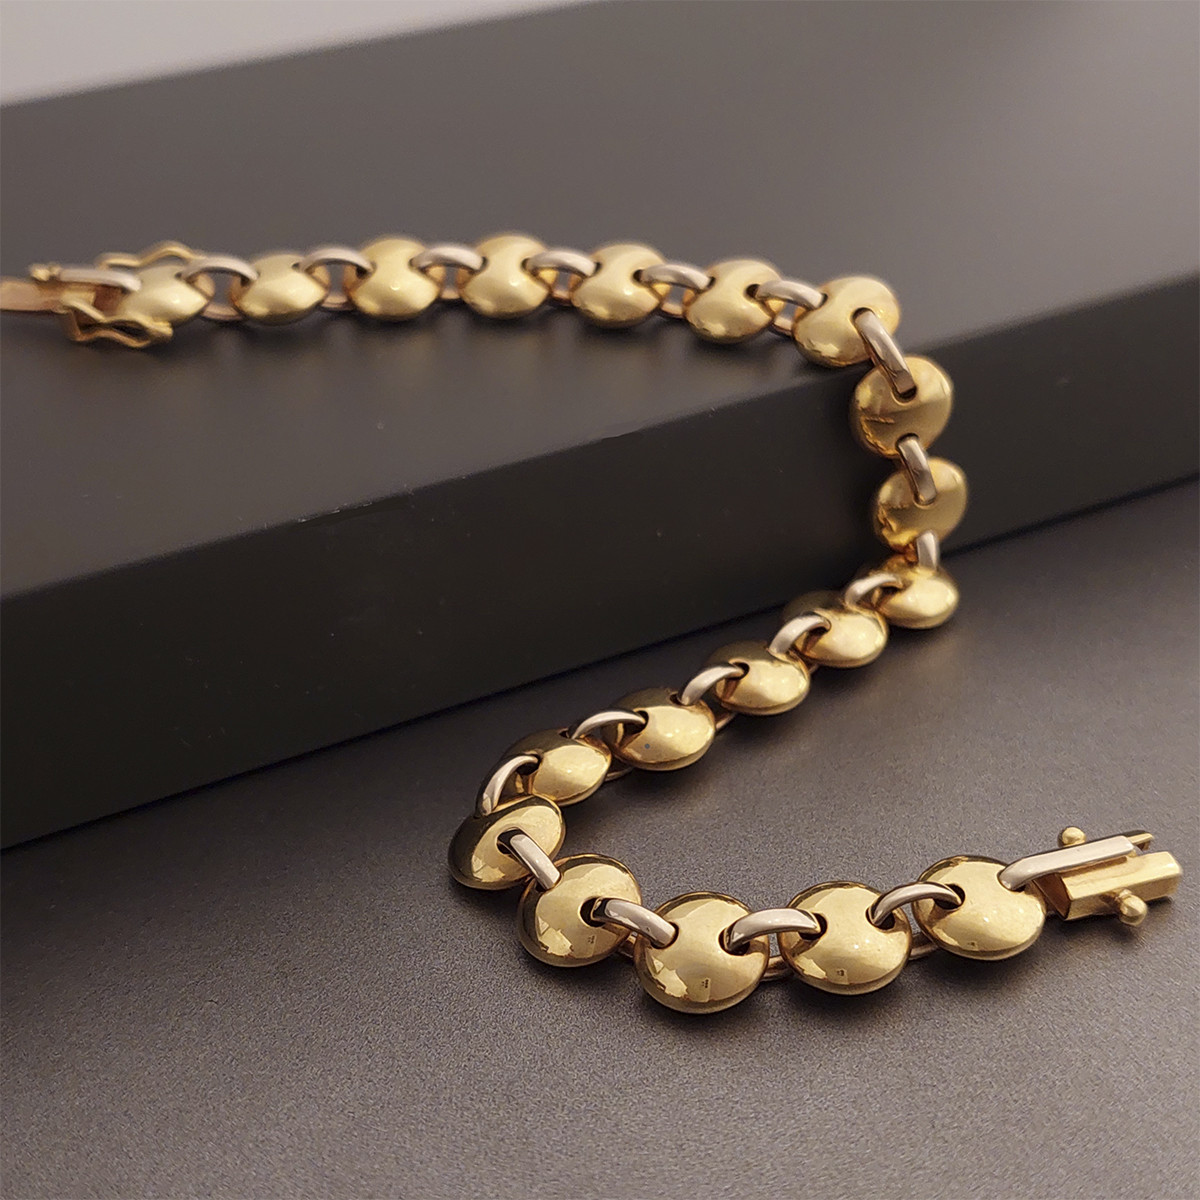 CALABROTE GOLD BRACELET